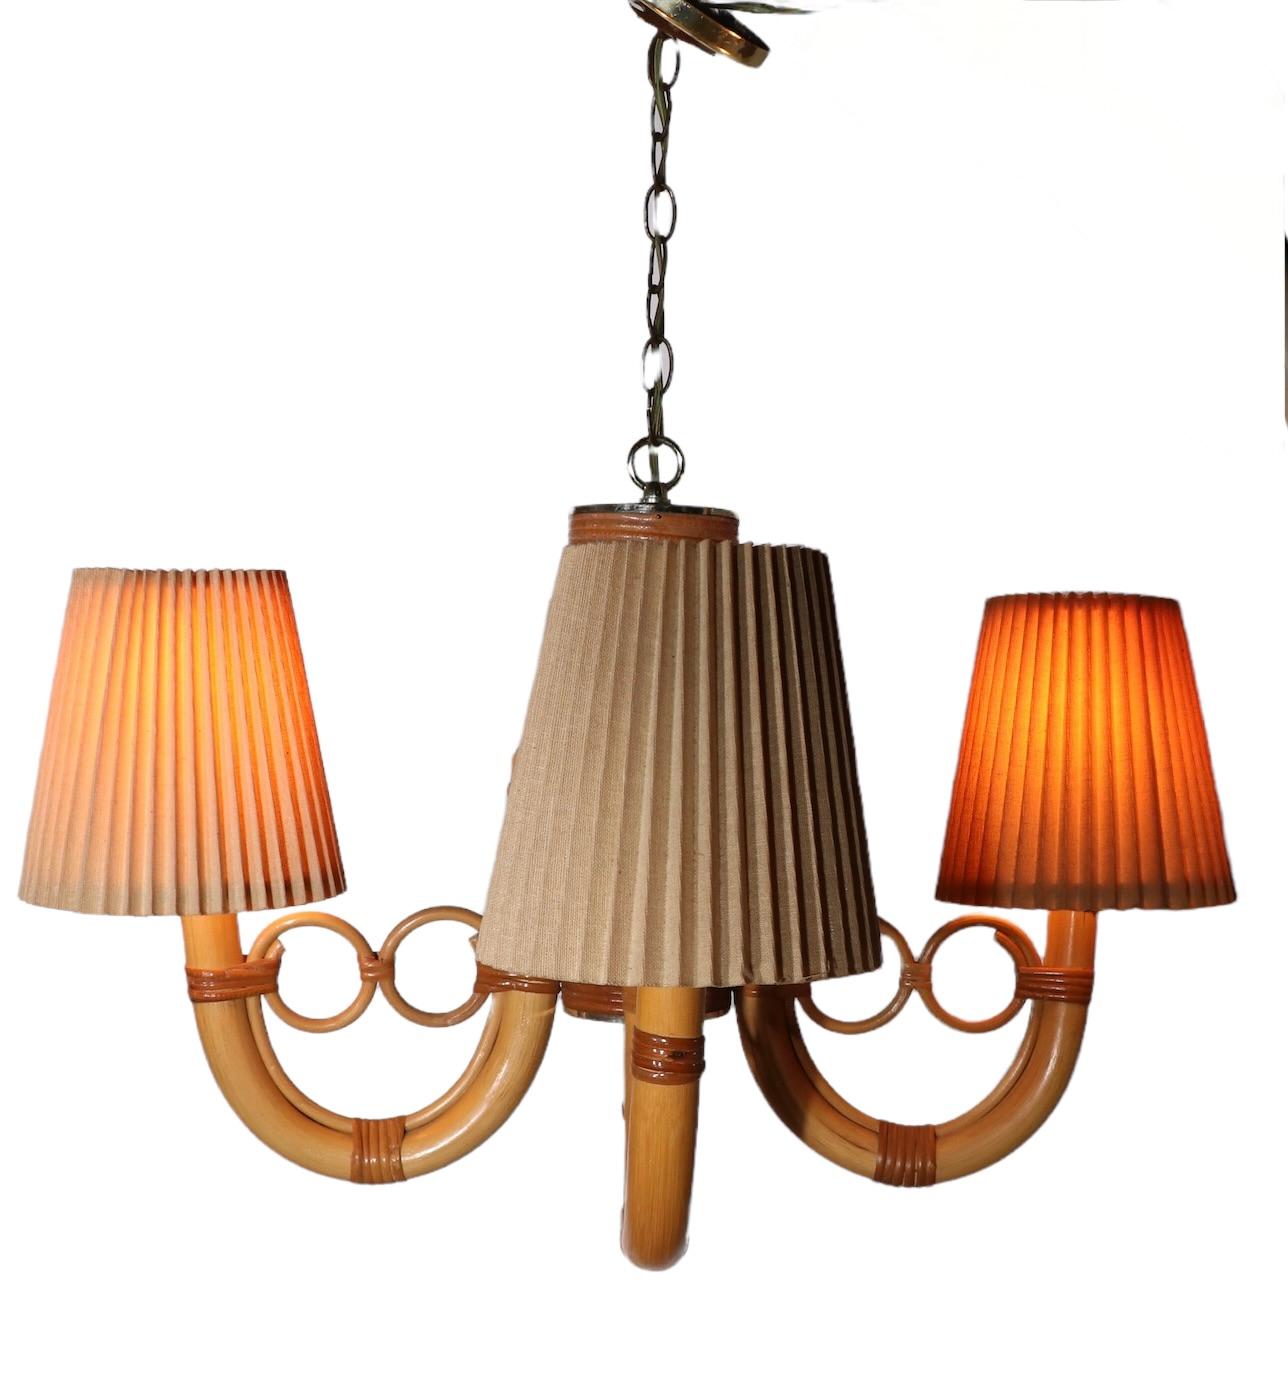 Metal Mod Style Four Arm Bamboo Chandelier by Maxim Lighting Los Angeles, Ca. 1970's For Sale